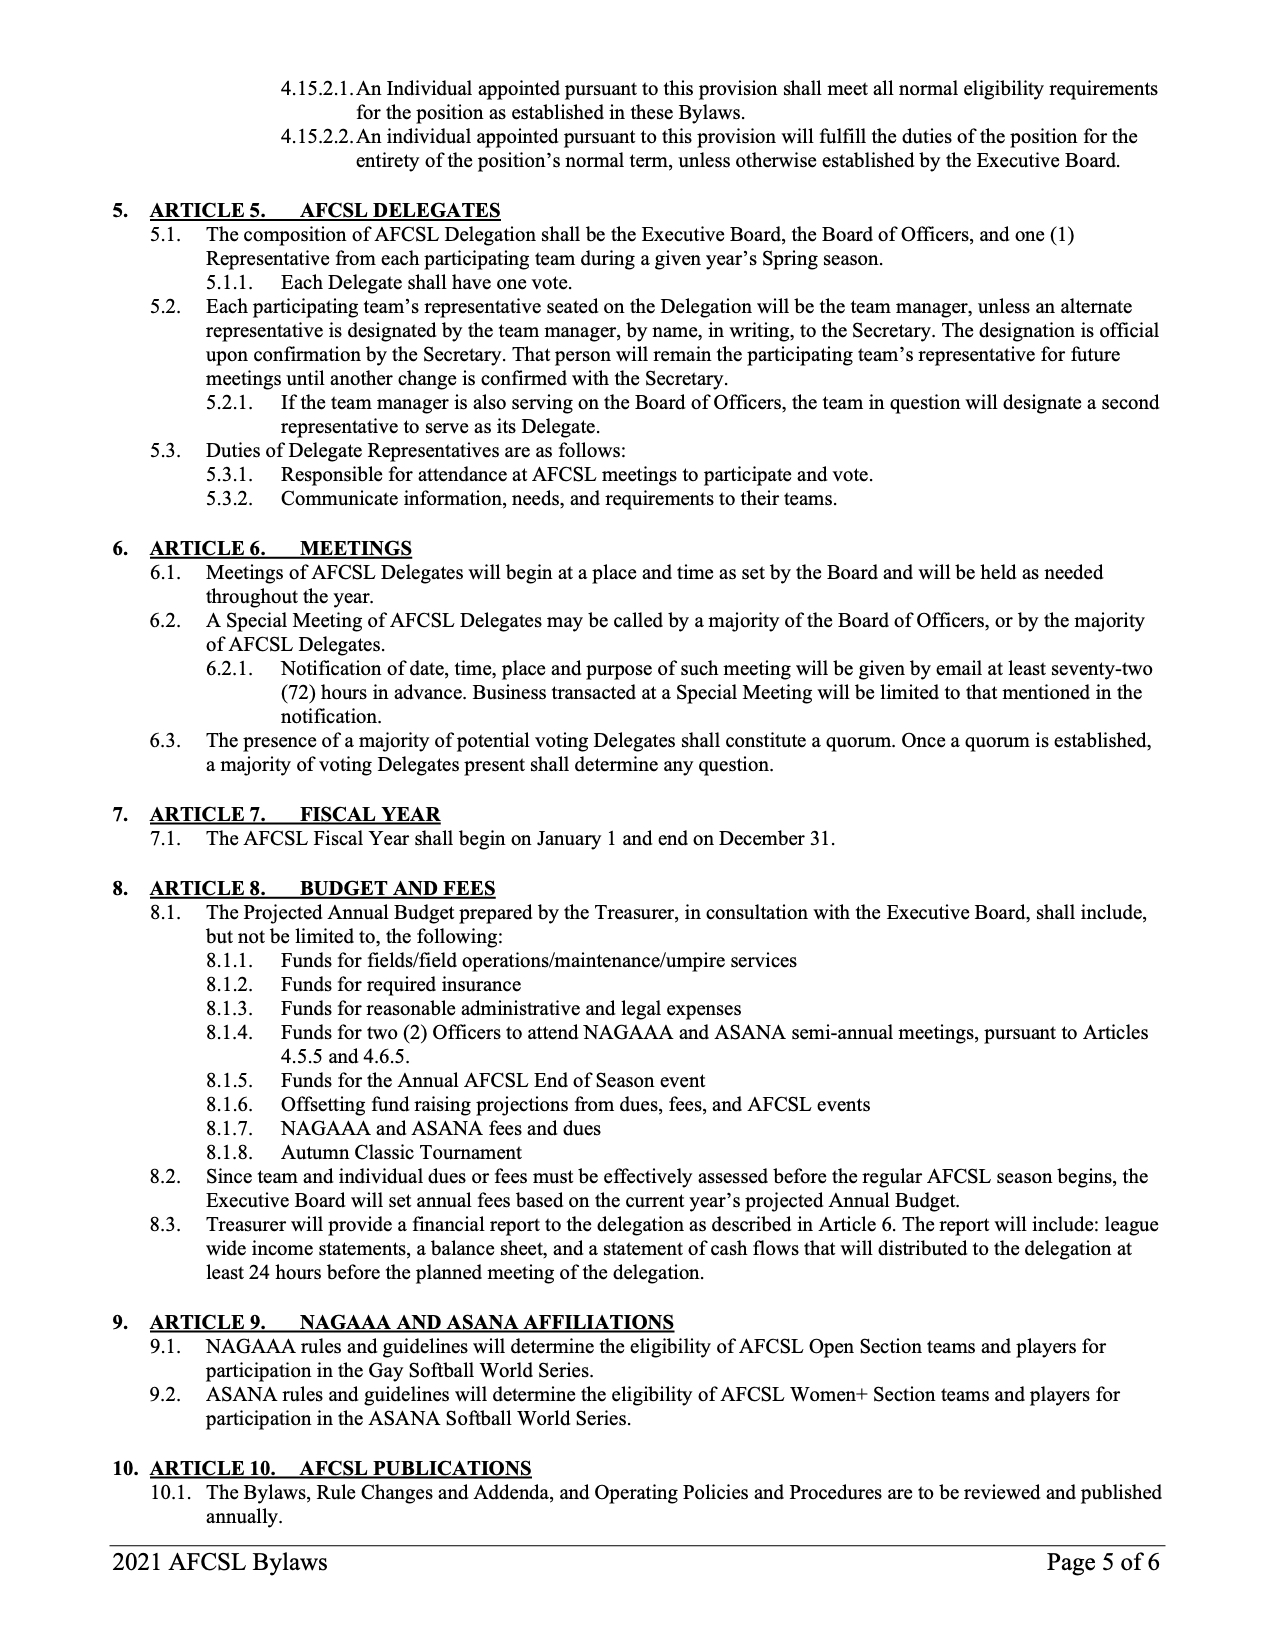 2021 AFCSL BYLAWS Page 5